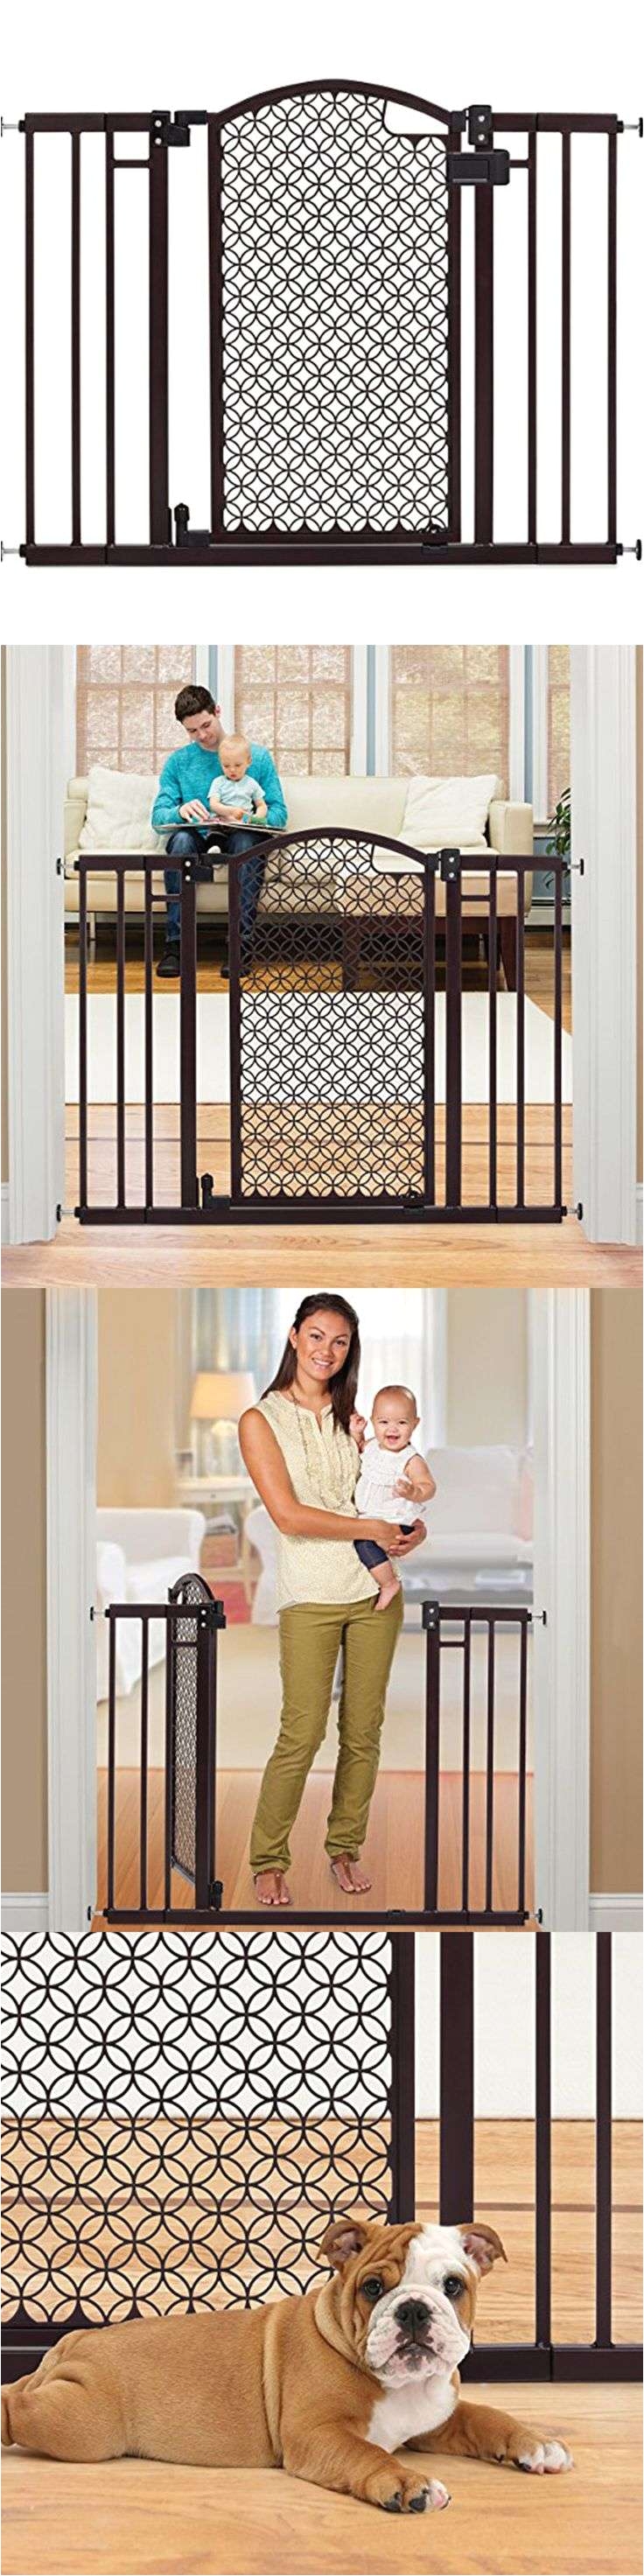 safety gates safety gate walk through extra wide baby child pet easy close fence